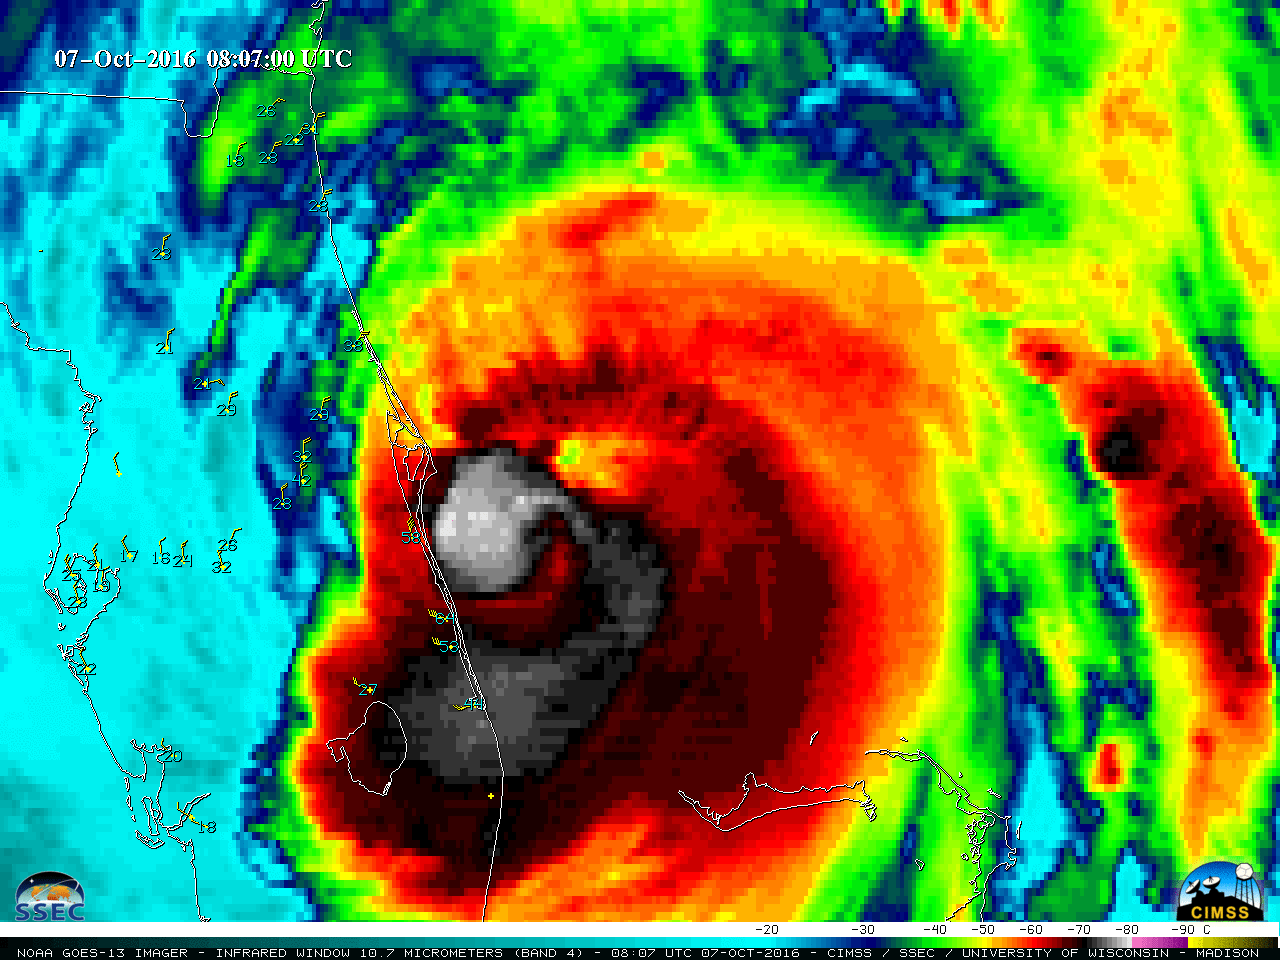 GOES-13 Infrared Window (10.7 um) images [Click to play animation]